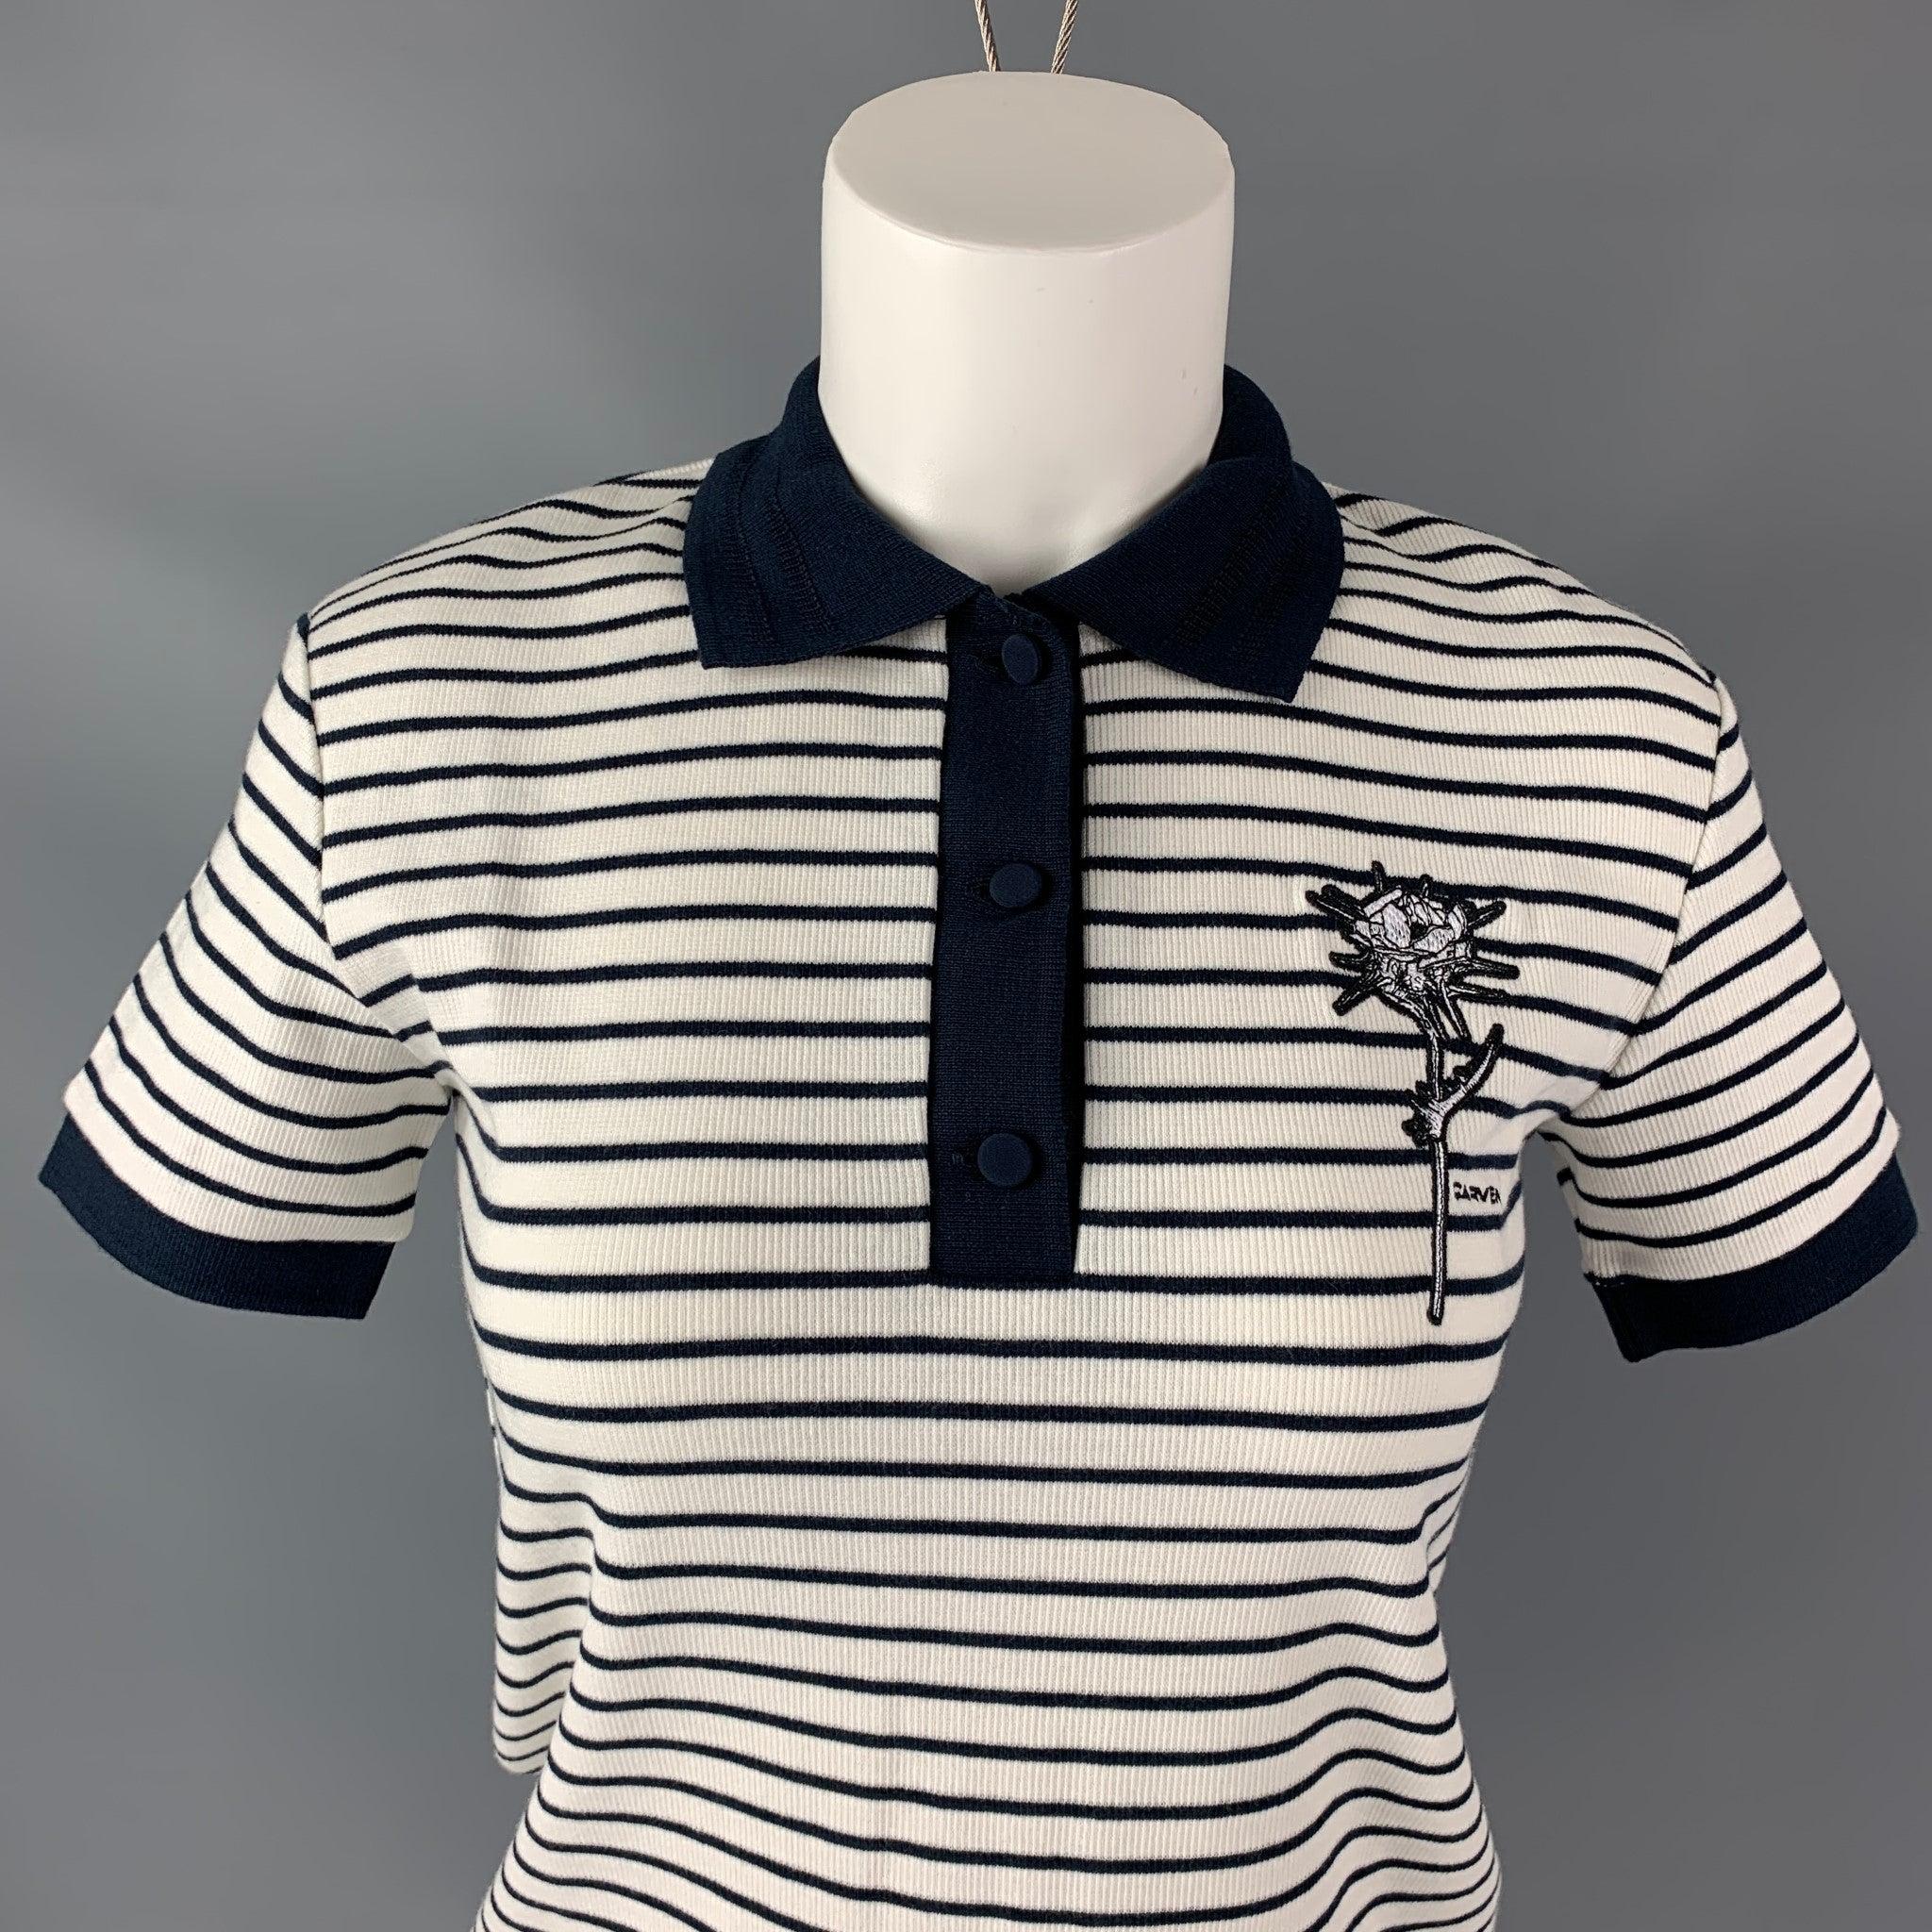 CARVEN polo shirt comes in white and navy cotton elastane fabric feature white and navy stripes and embroidered flower.Very Good Pre-Owned Condition. 
 

 Marked:  S 
 

 Measurements: 
  
 Shoulder:17 inBust: 33 inSleeve: 7 inLength: 21.5 in
  
  
